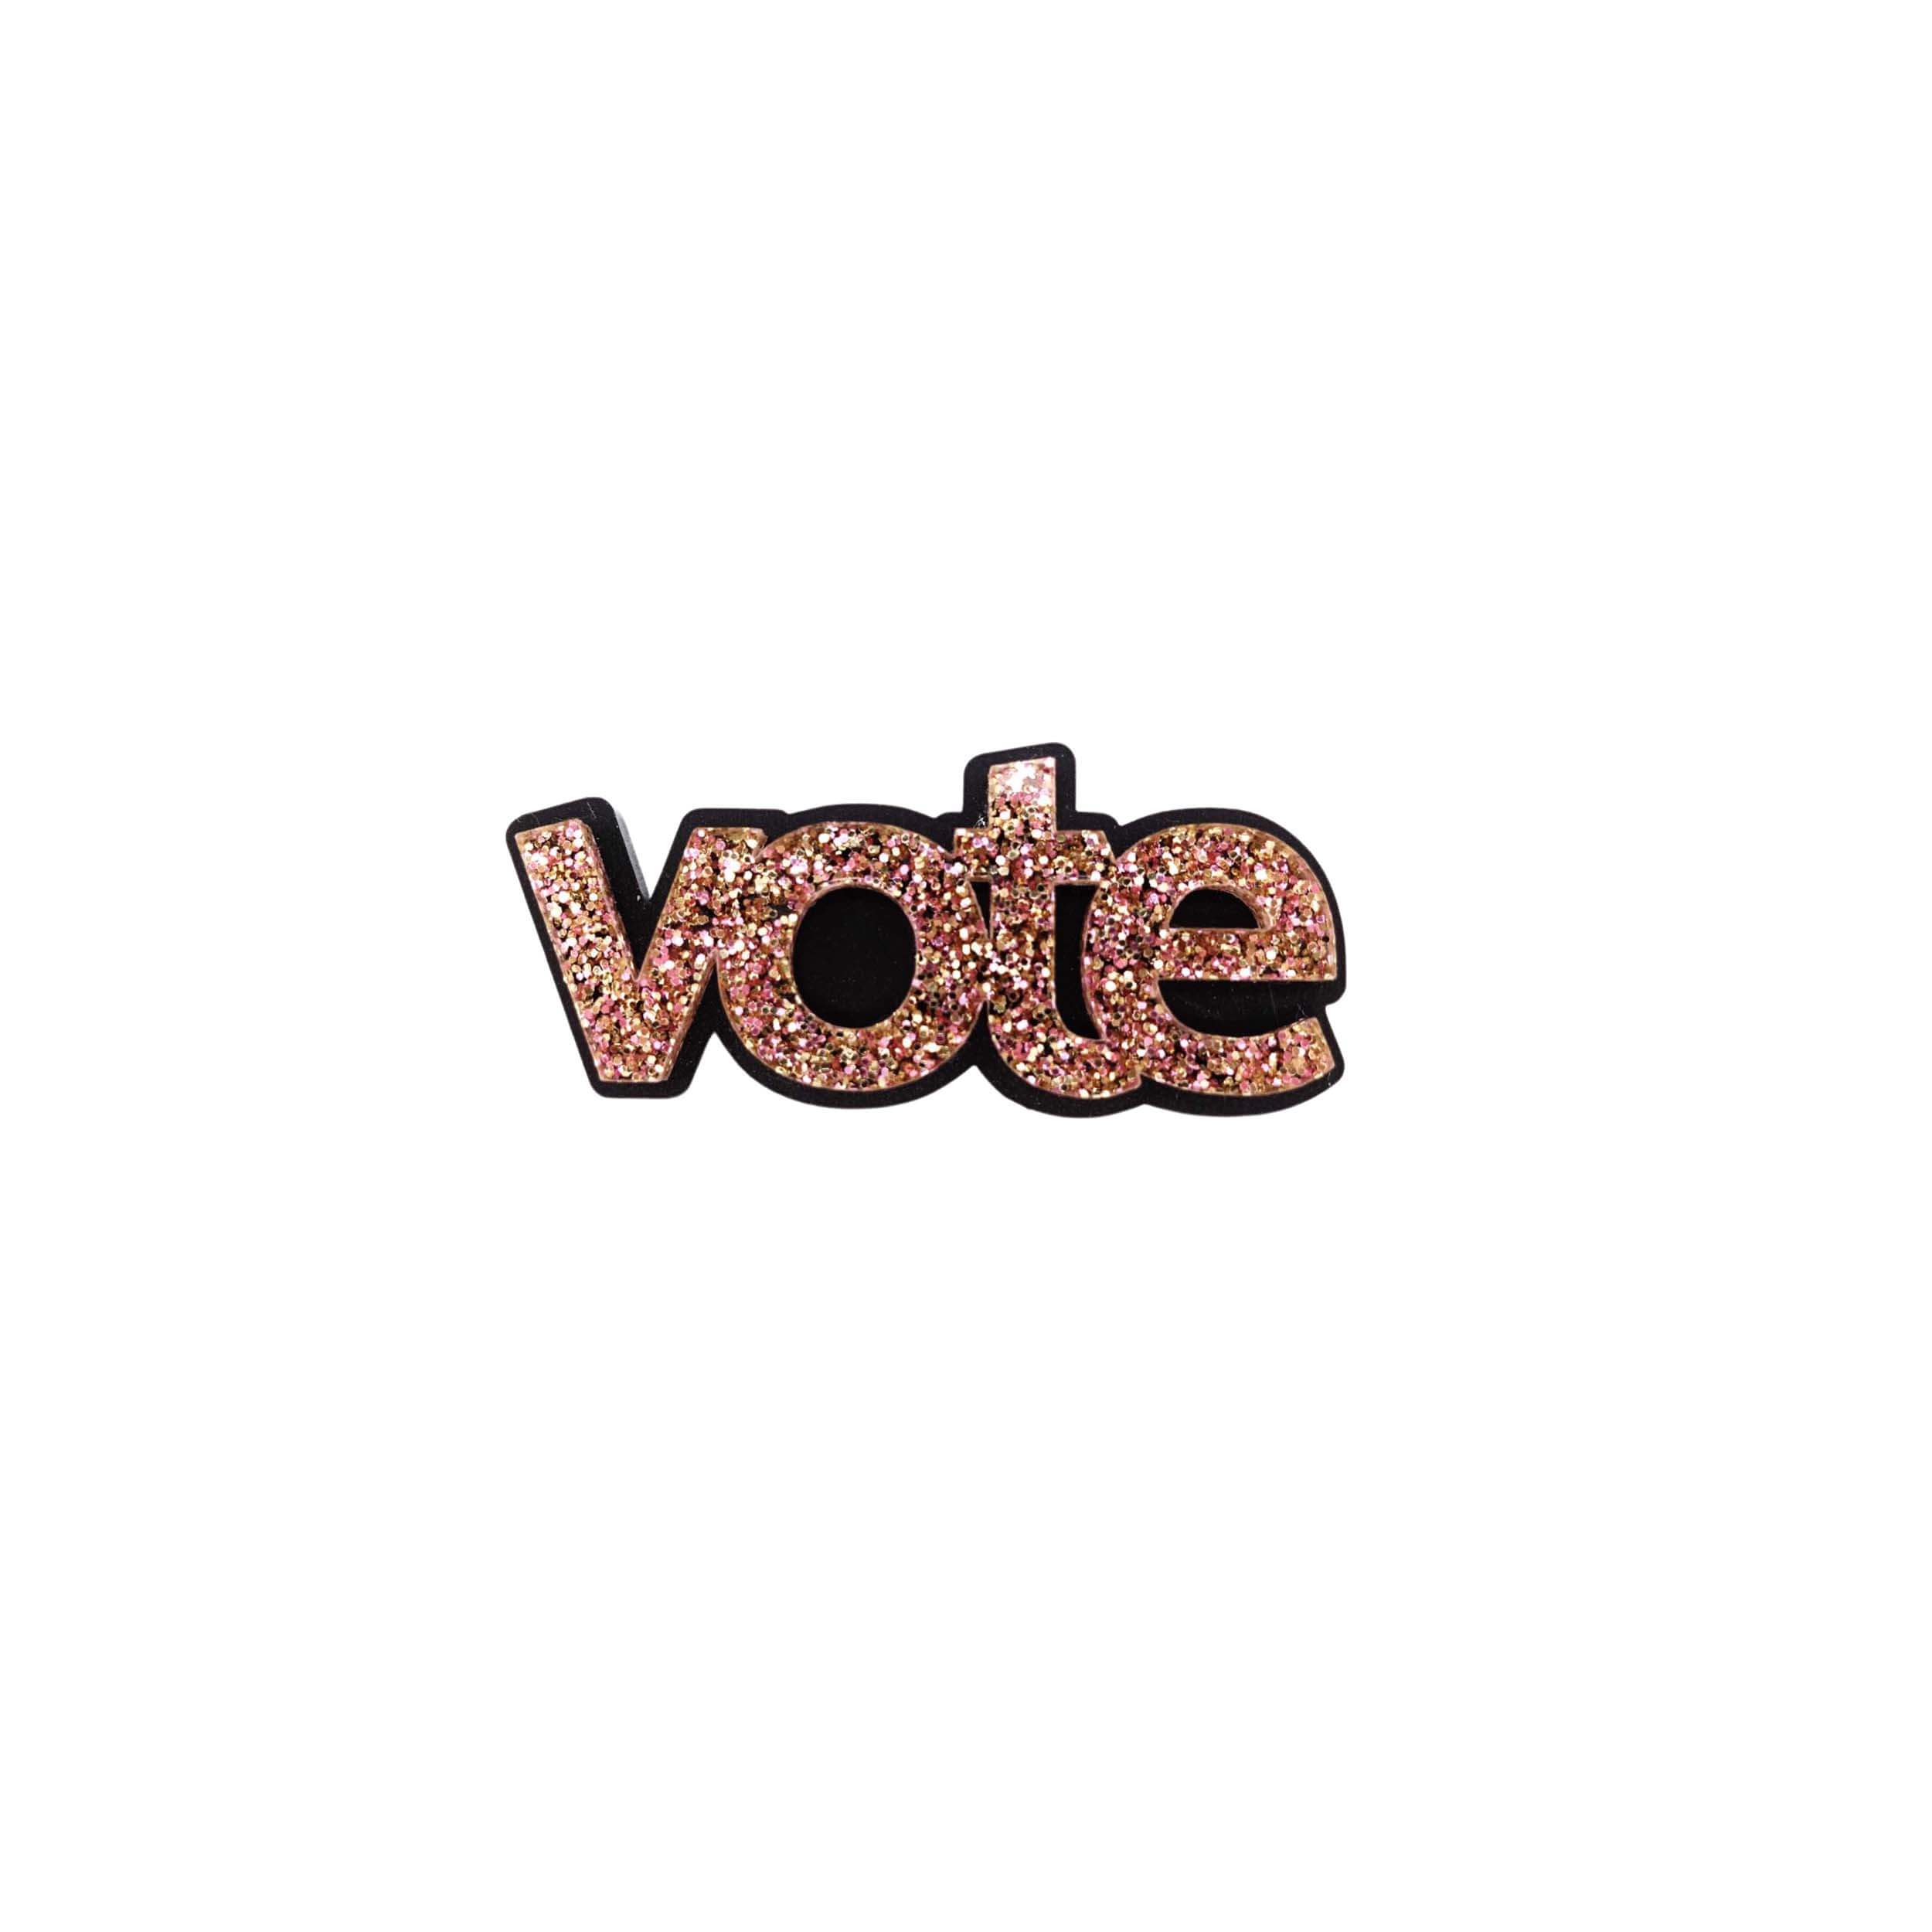 A pink fizz glitter vote brooch designed by Sarah Day for Wear and Resist. 